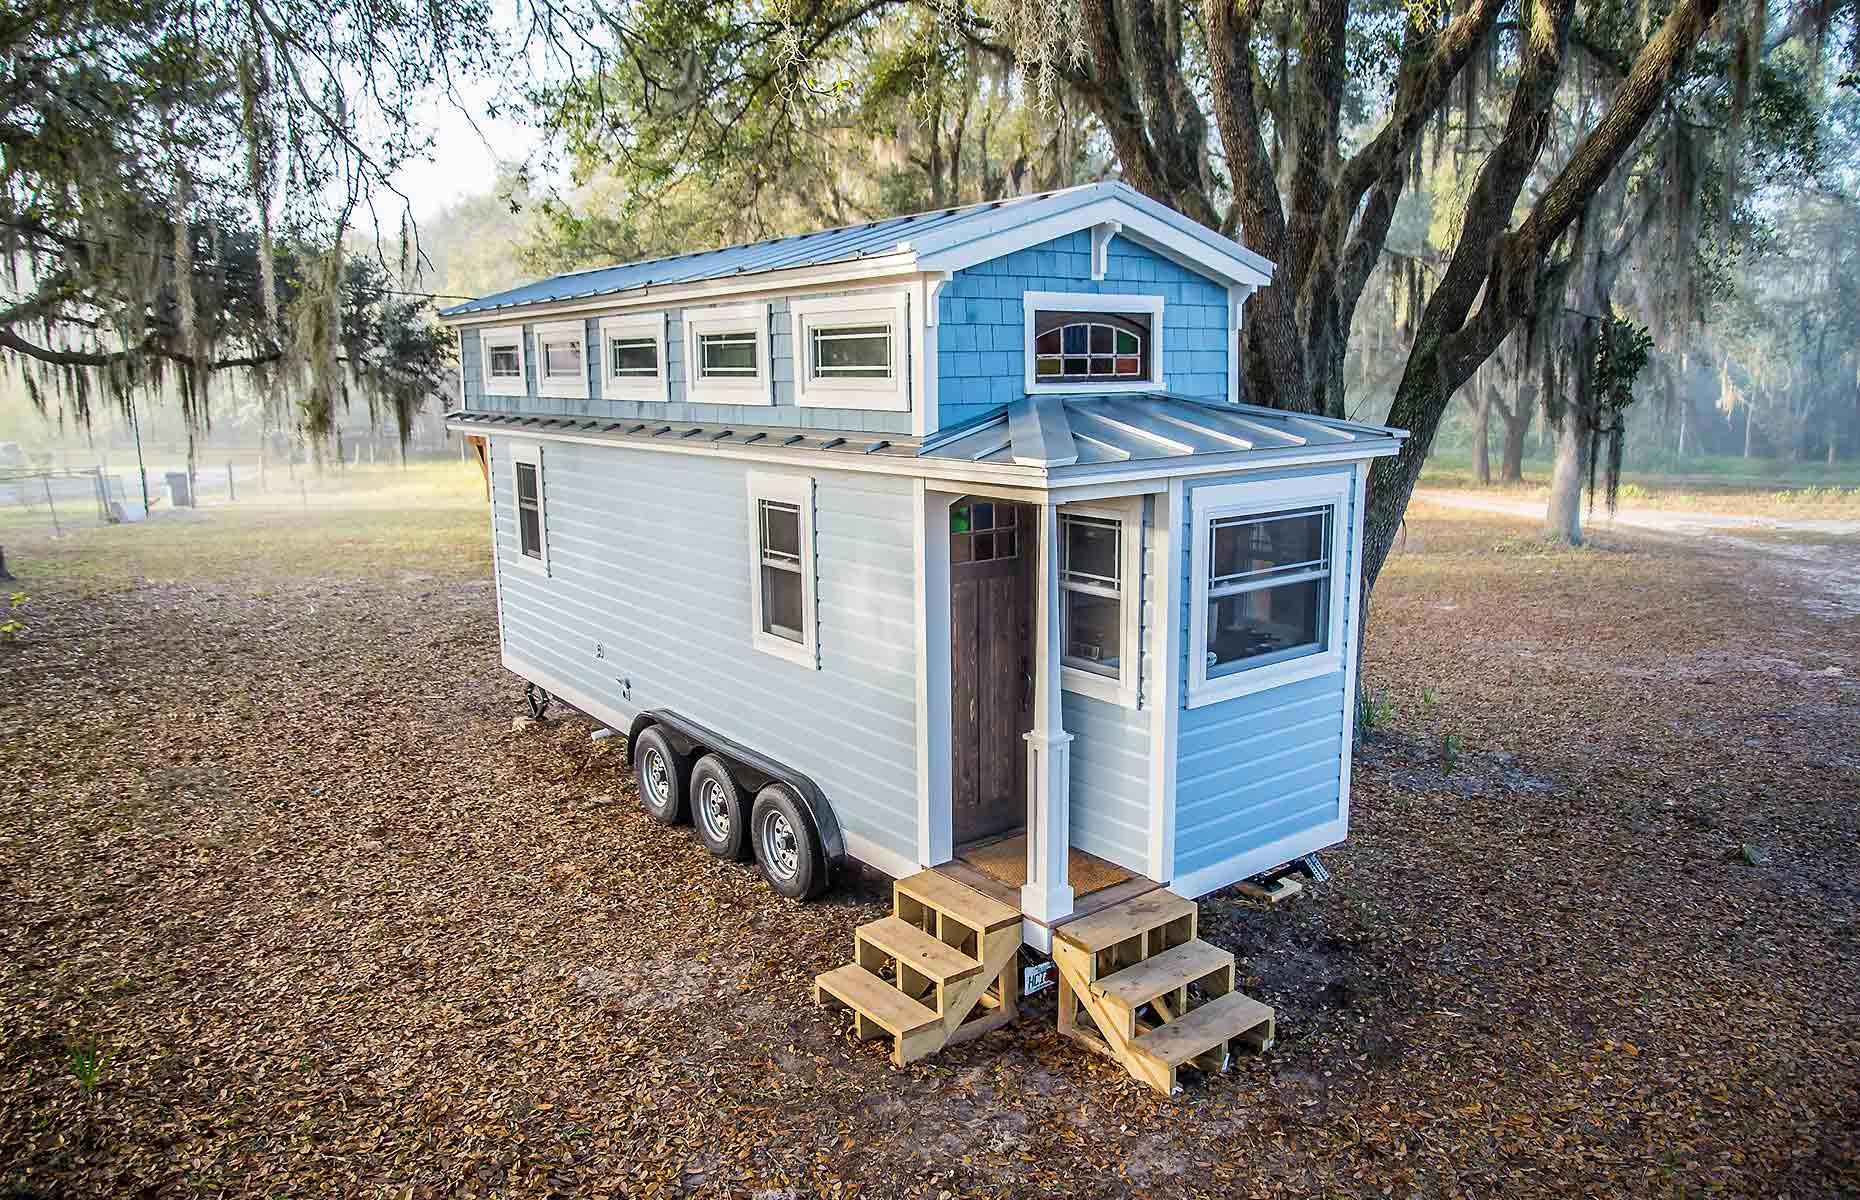 <p>They stumbled upon Tiffany, their first tiny home together, in an unlikely place: Craigslist. At first, Tim was incredulous: "It’s a beautiful house and I was looking on Craigslist thinking this has to be a scam or something”.</p>  <p>Built by Adam from A New Beginning Tiny Homes, the couple purchased the immaculate 270-square-foot tiny house on wheels for $72,000 (£58.5k).</p>